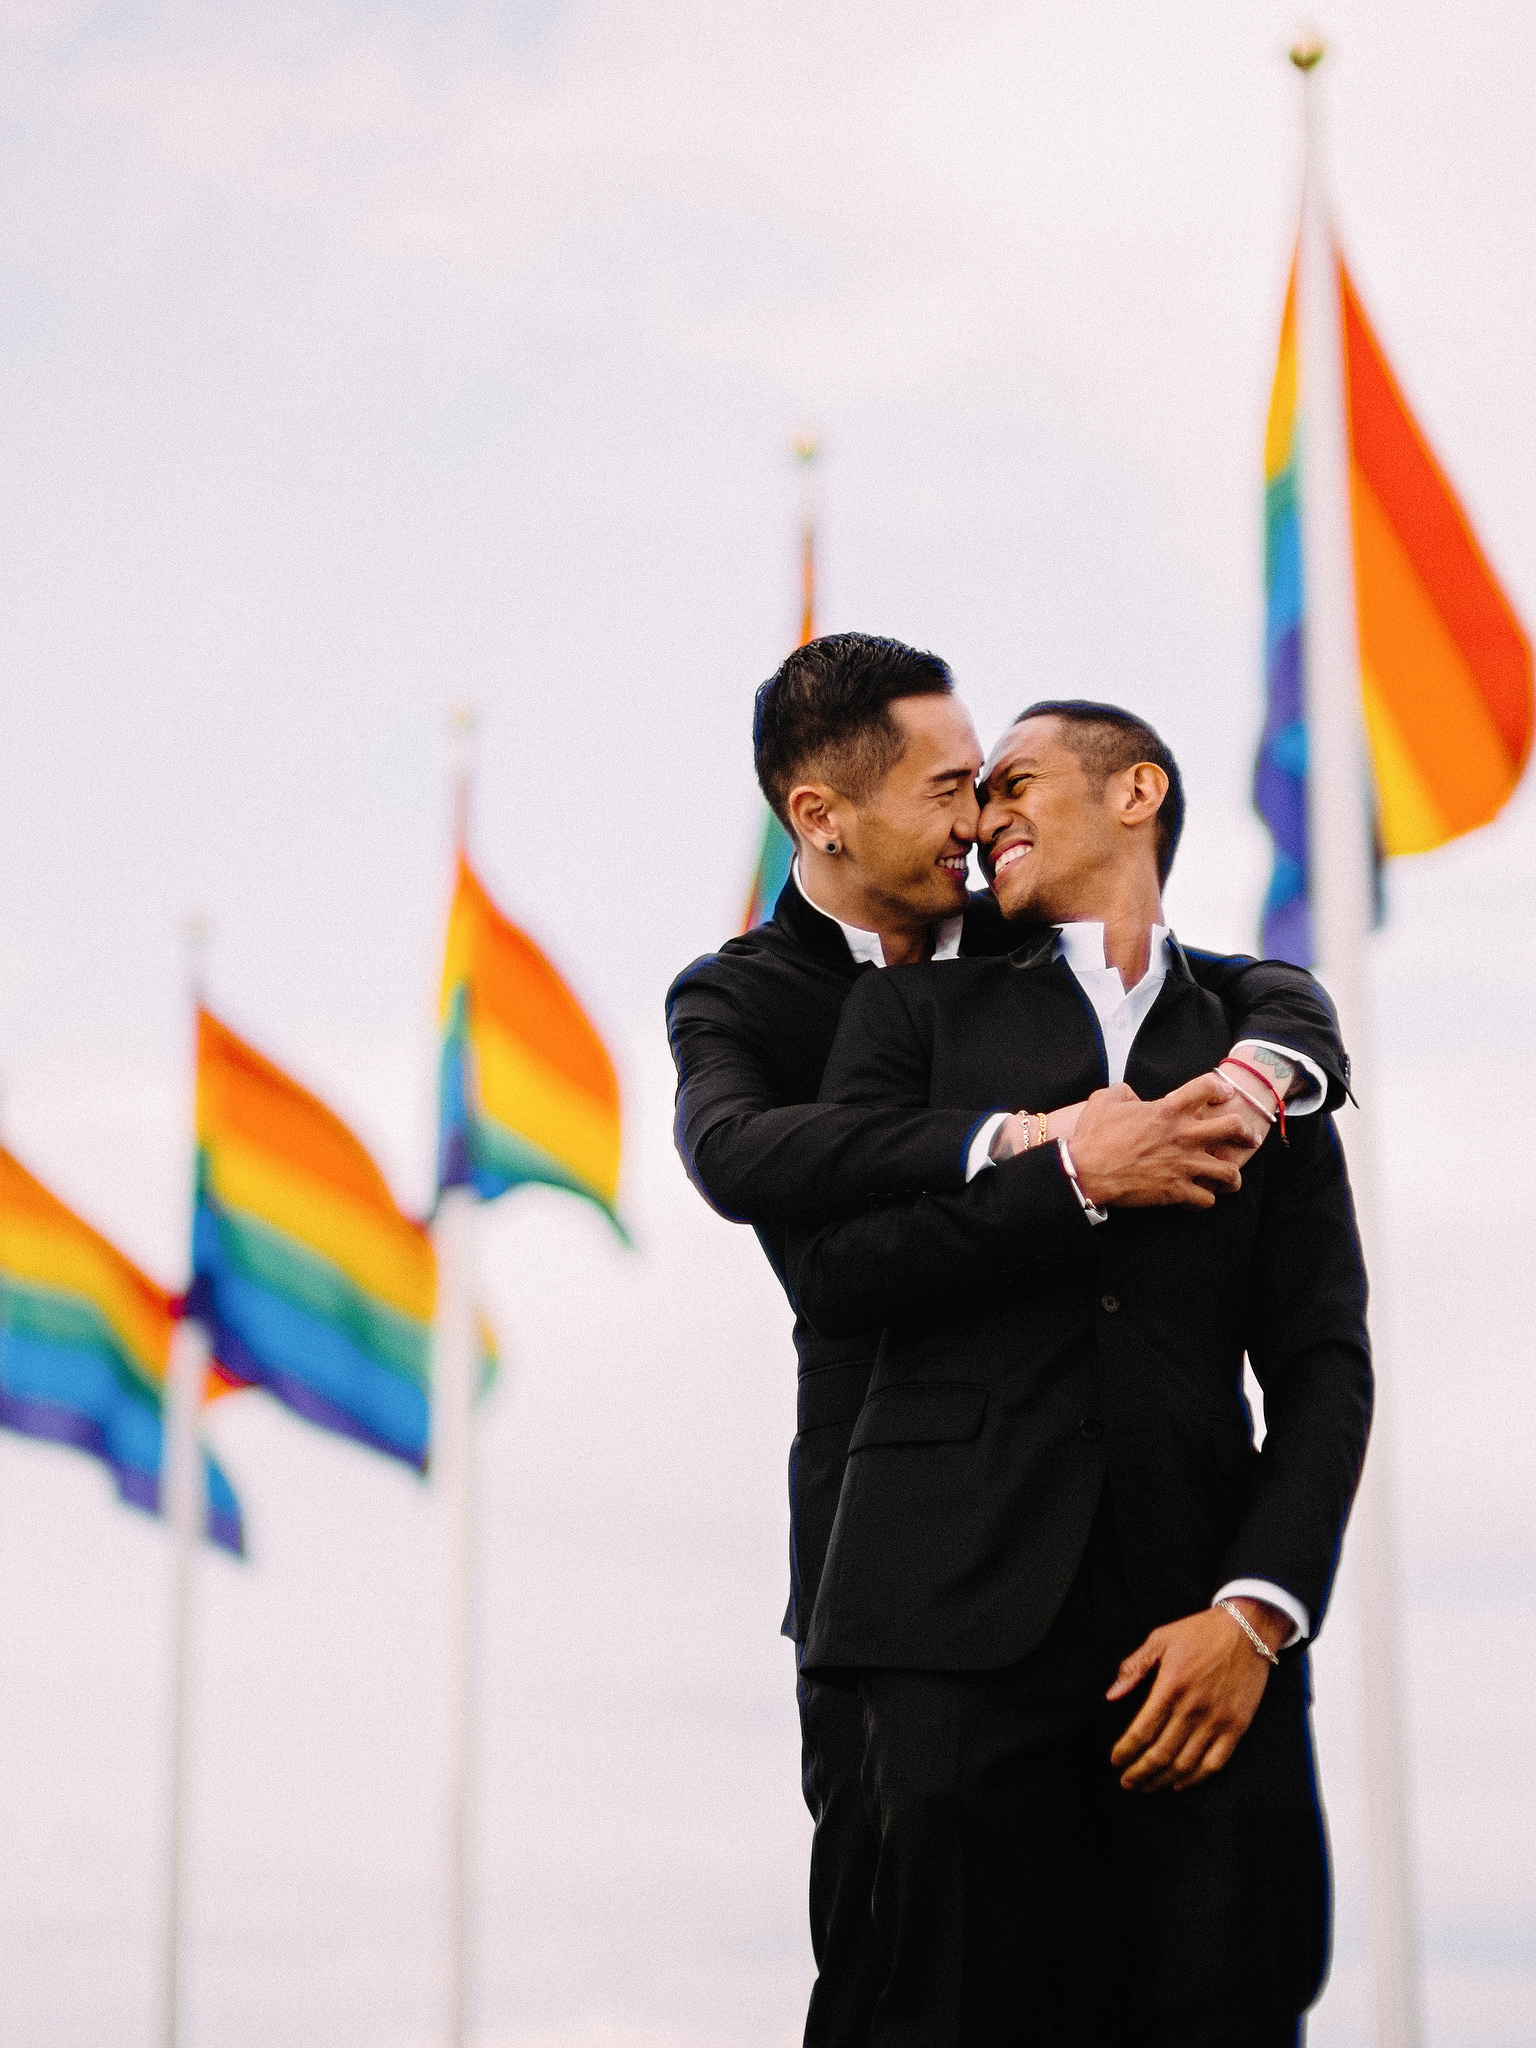 Husband and husband with rainbow flags in Reykjavik, Iceland